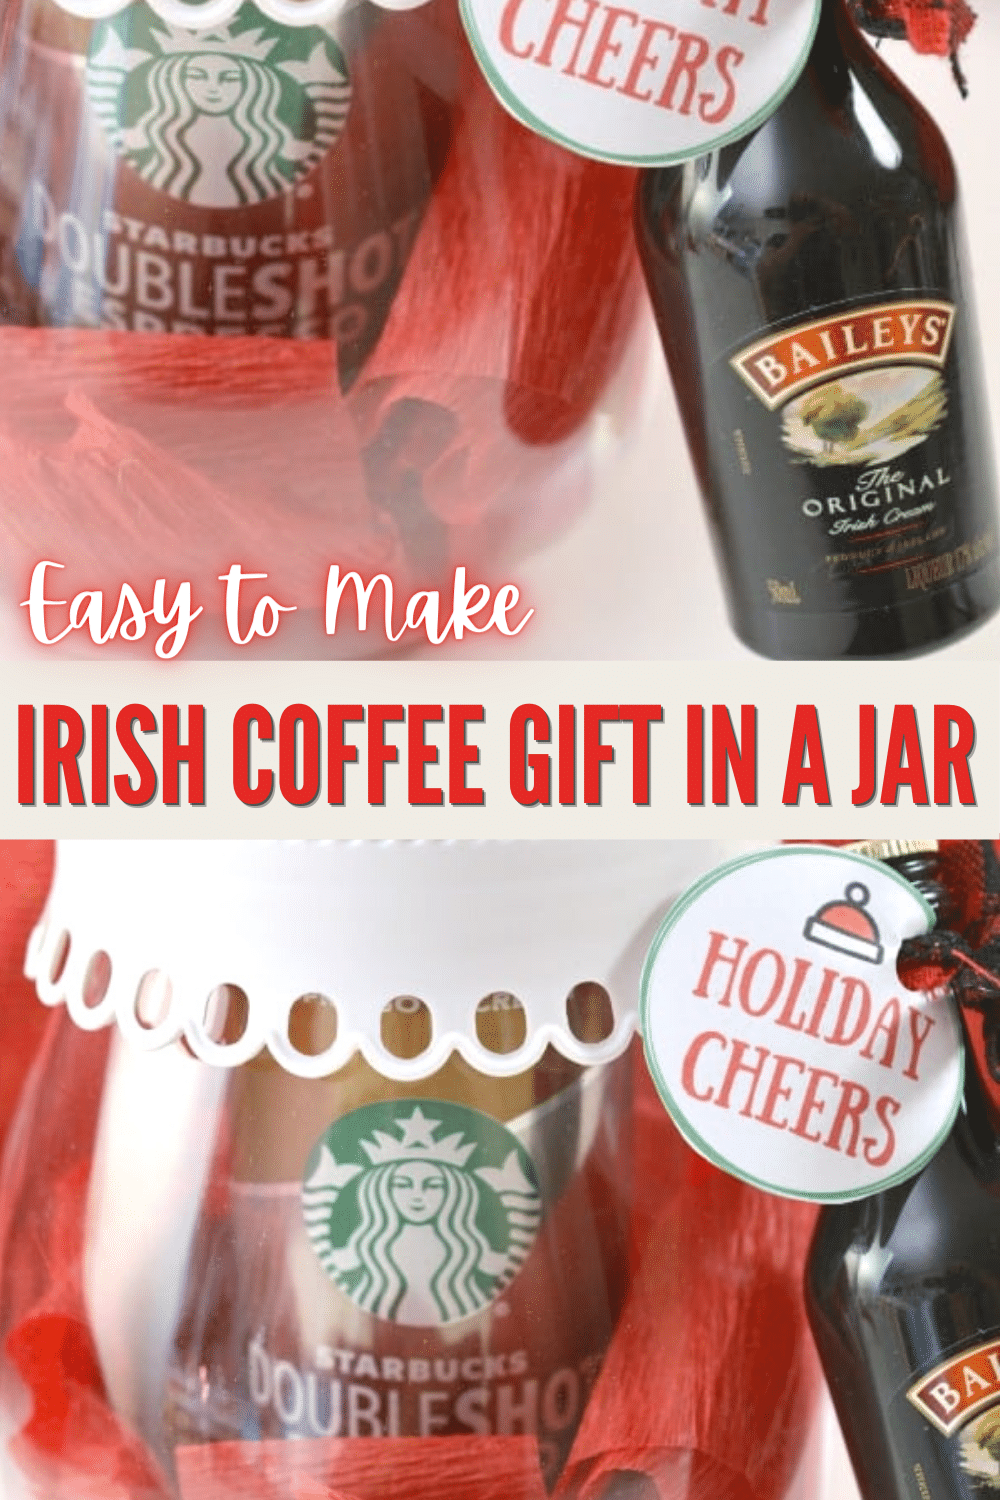 This Irish Coffee Gift in a Jar is such a cute gift idea and SO EASY to put together! #easygiftidea #coffeegifts via @wondermomwannab